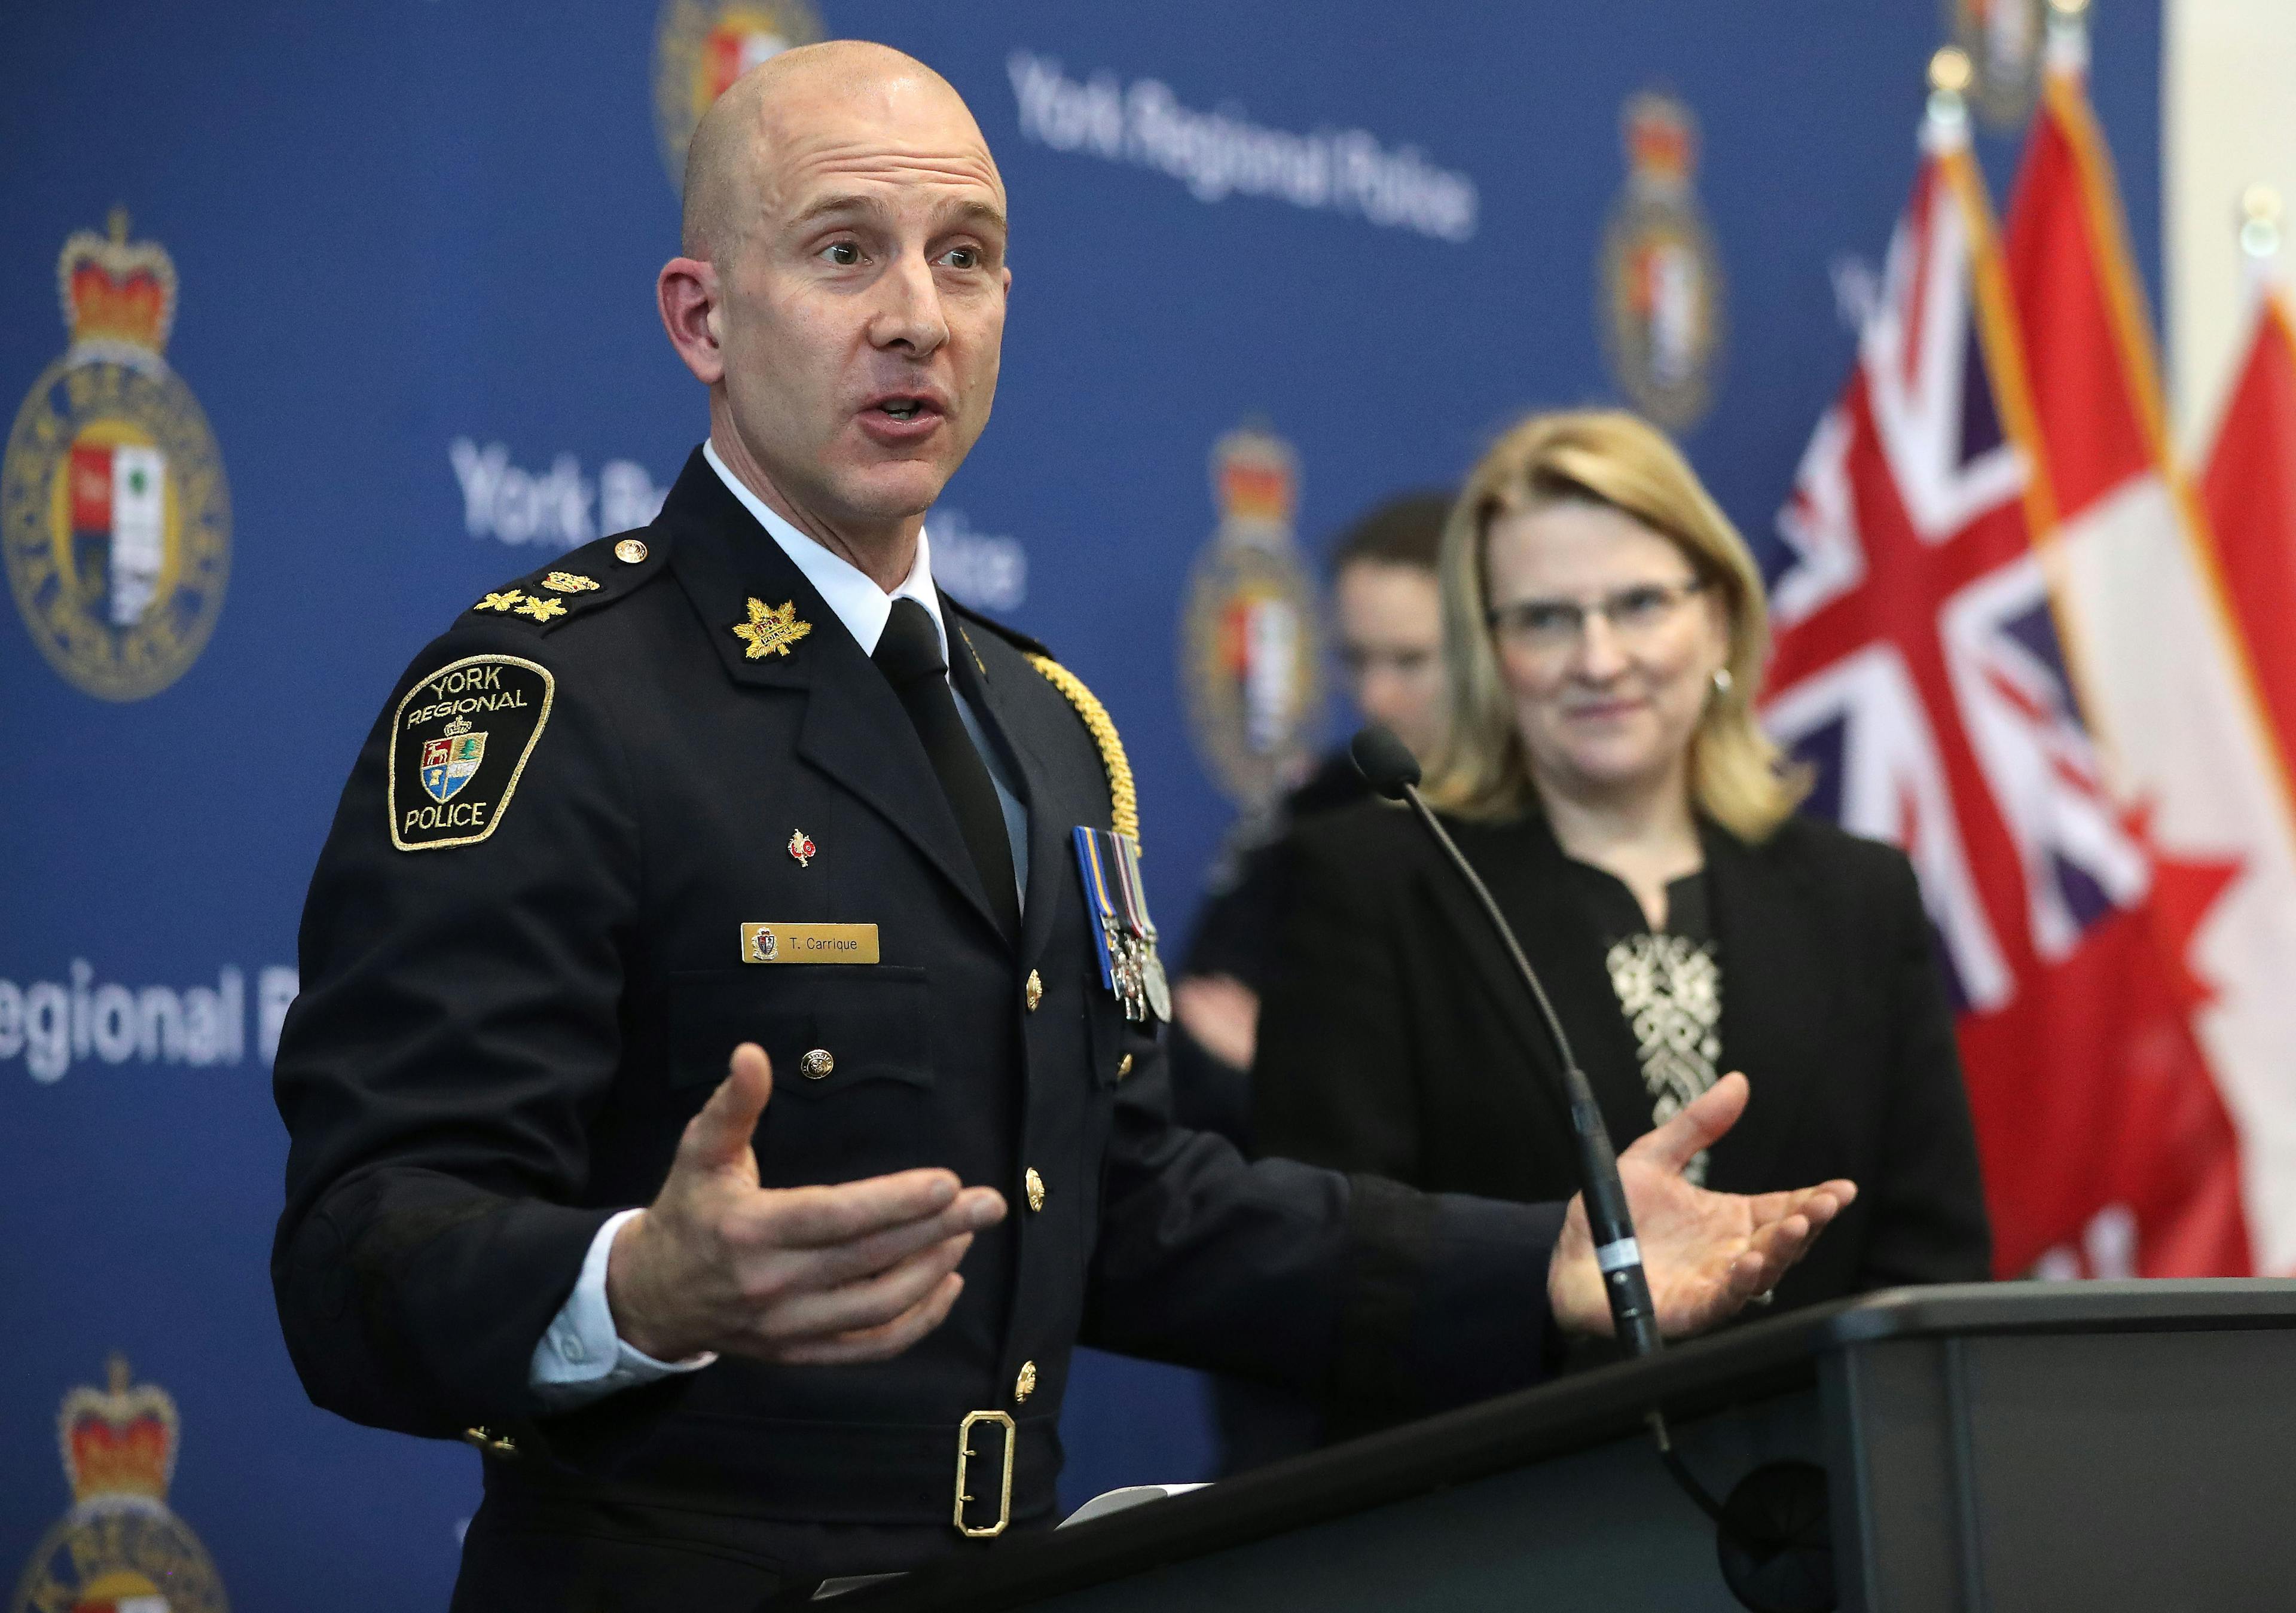 York Regional Police Deputy Chief Thomas Carrique selected as next OPP Commissioner